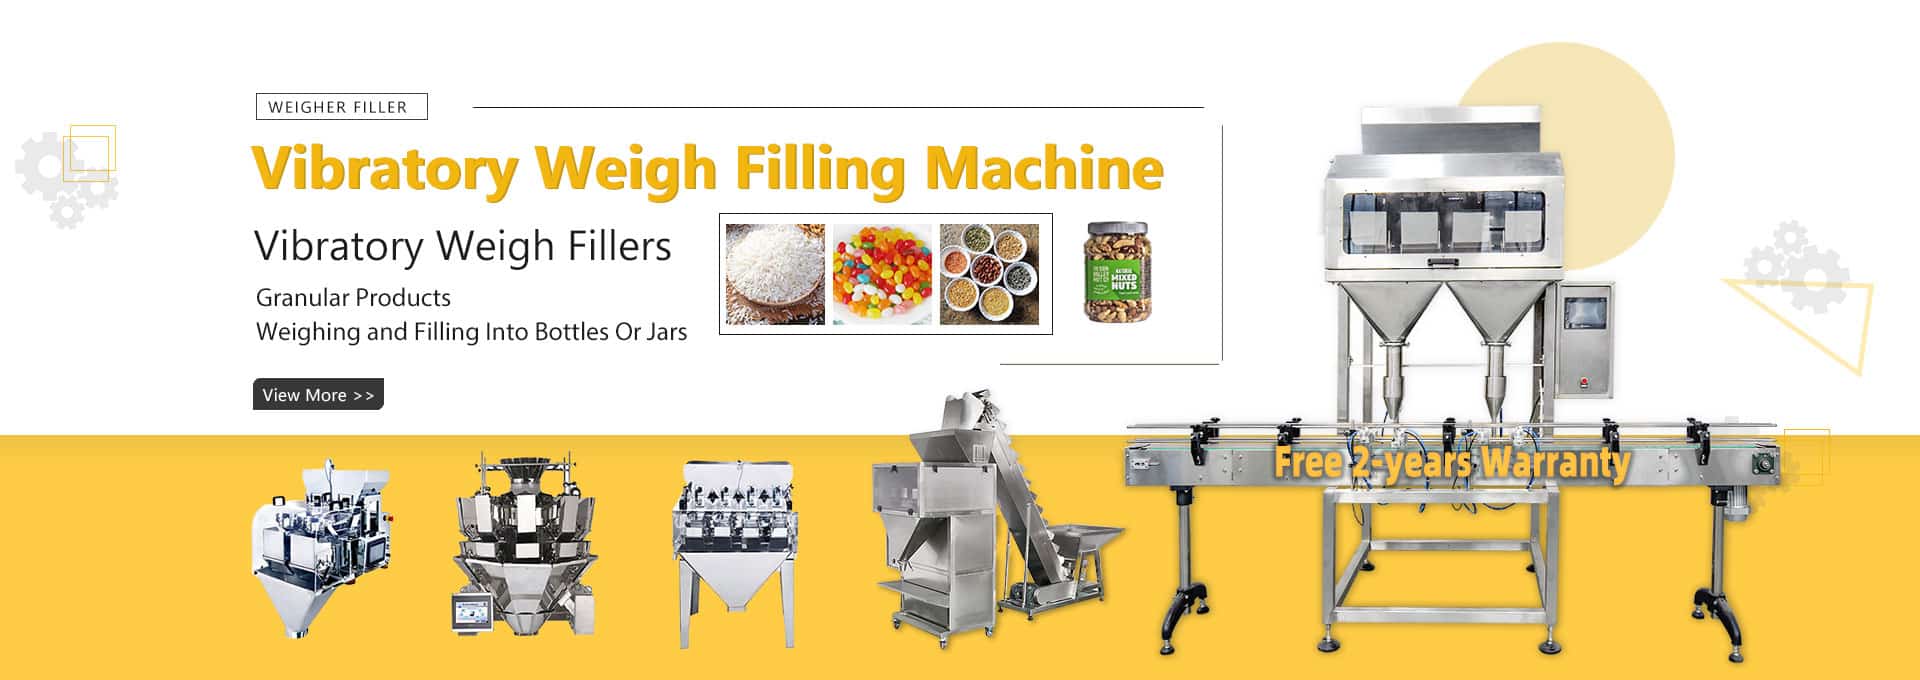 banner vibratory weigh fillers